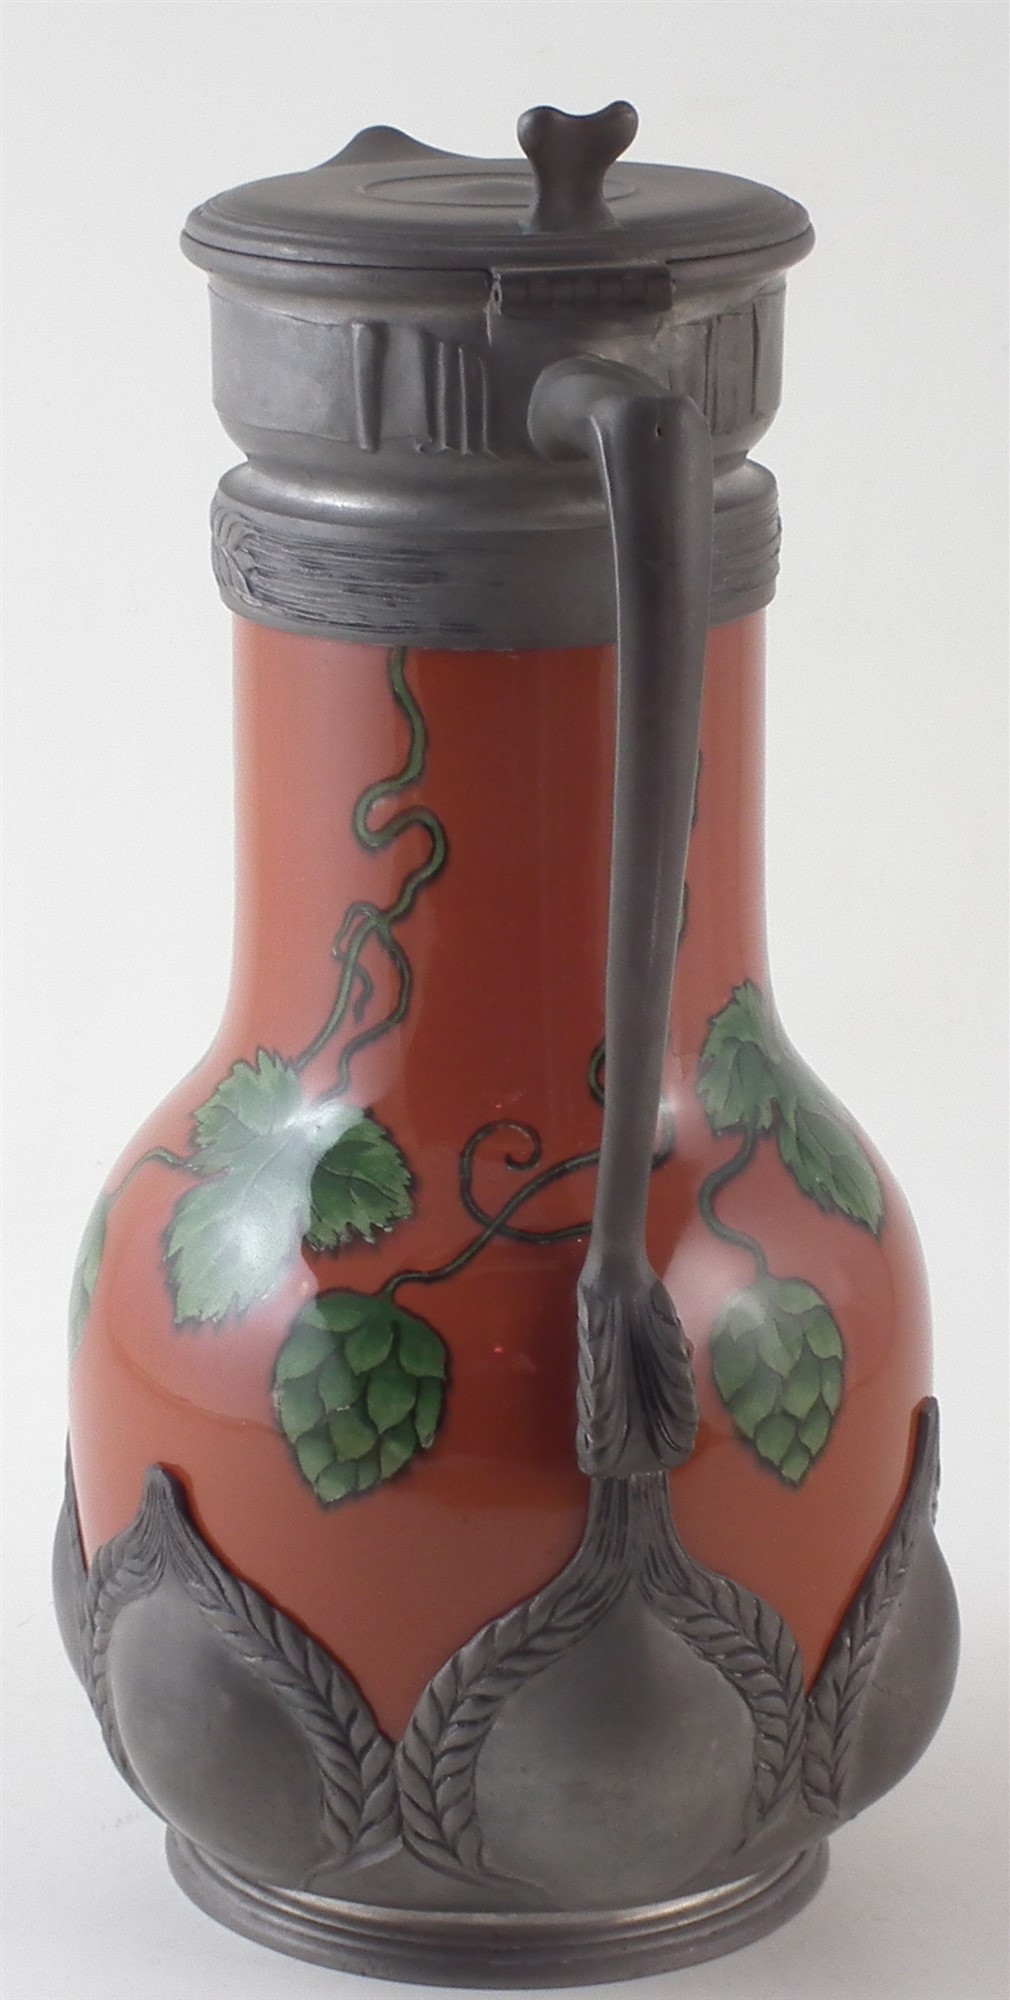 Villeroy and Boch orivit pewter beer jug circa 1900 , decorated with hops, the pewter mount - Image 4 of 6